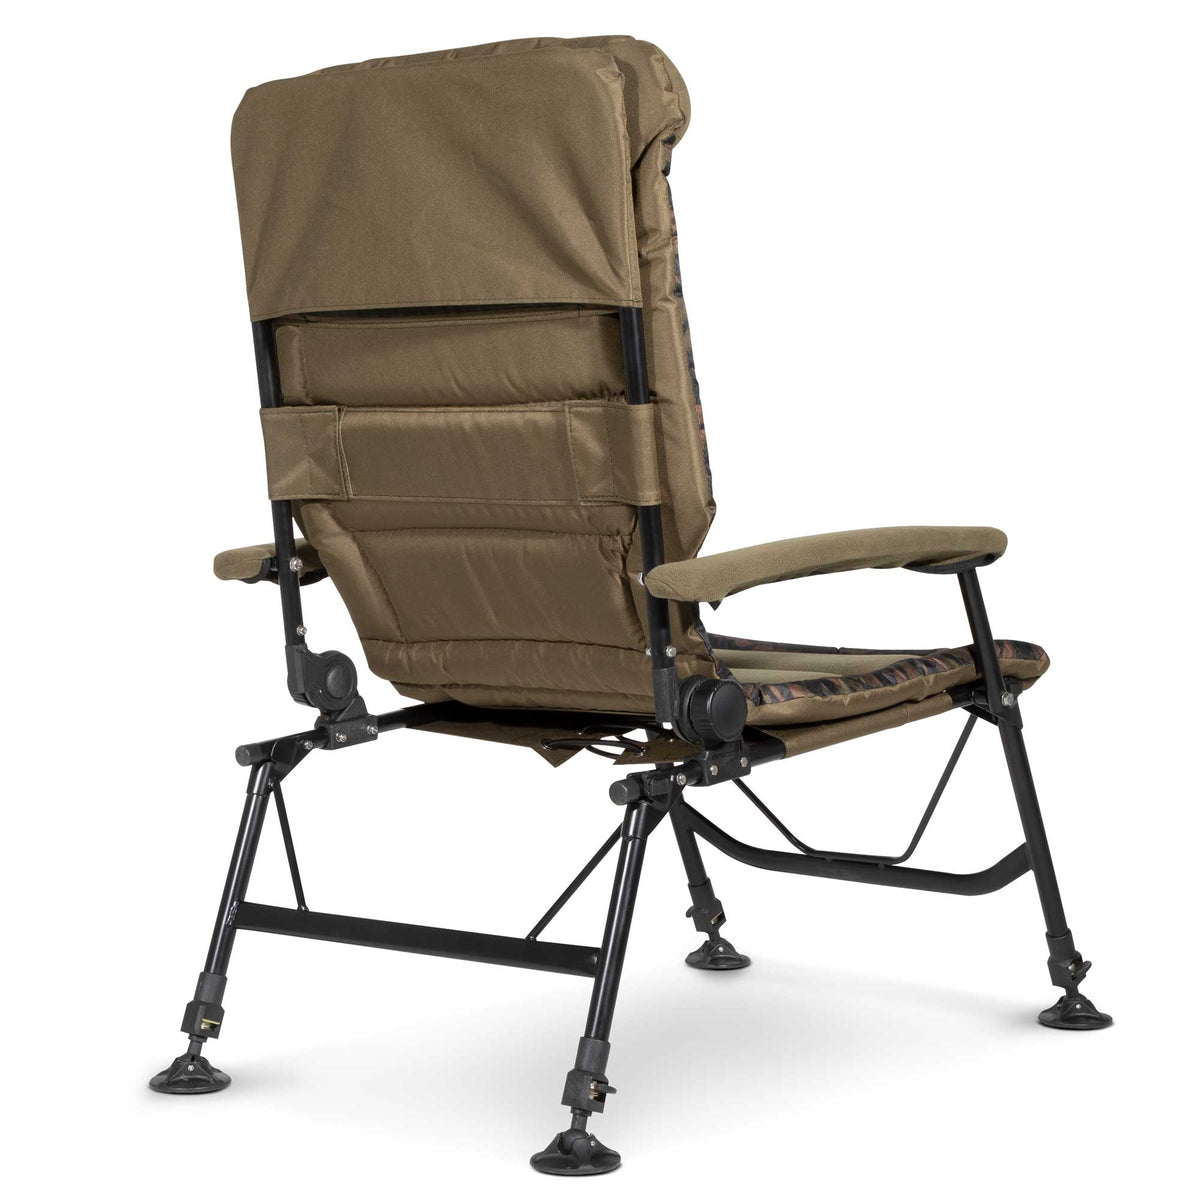 Deluxe Portable Fishing Chair, Reclining, Padded Armrests, Adjustable -  Dellonda